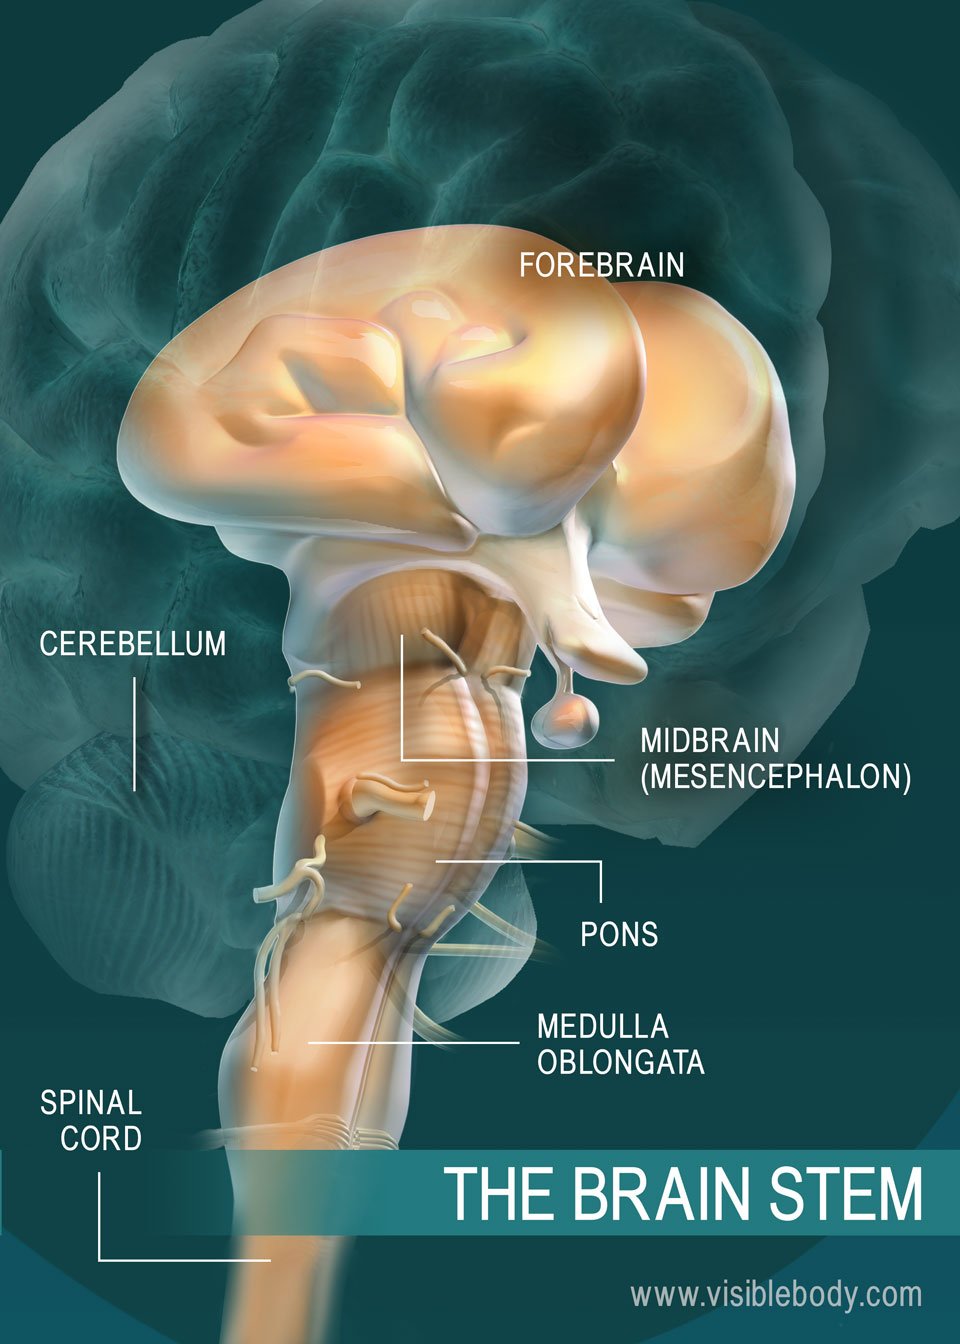 A diagram of the parts of the brain stem